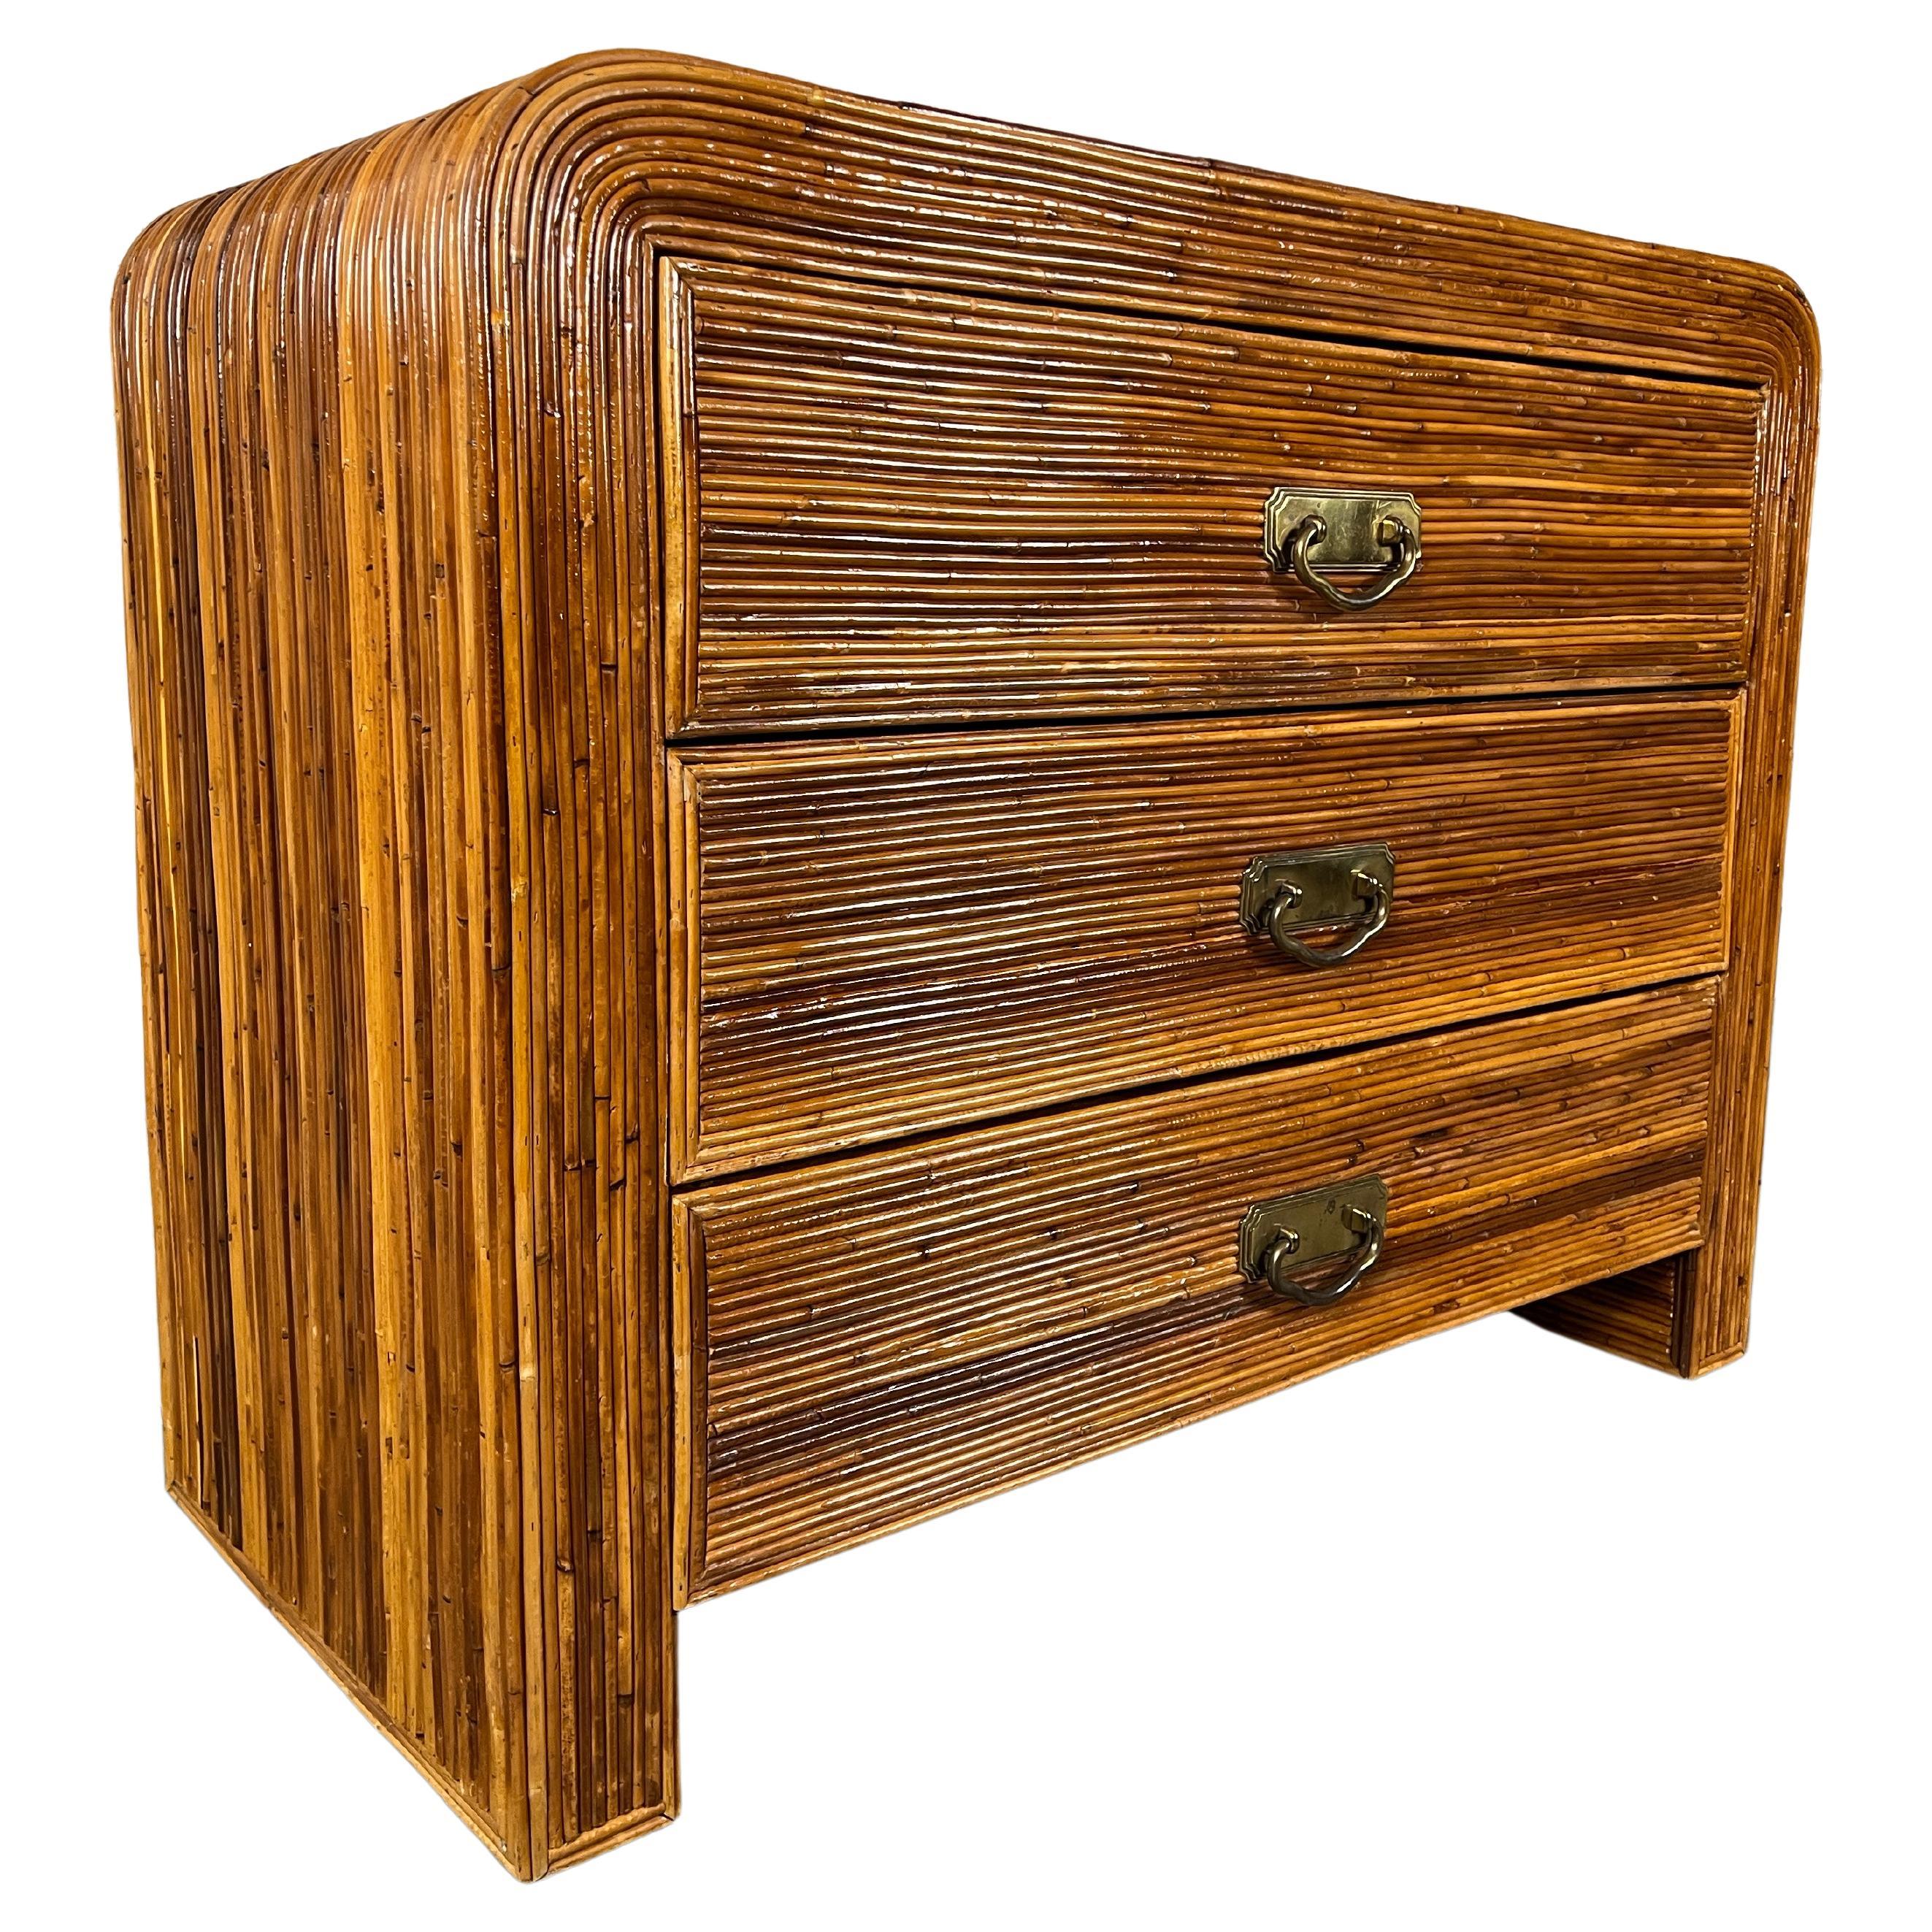 Pencil Reed Rattan Chest of Drawers